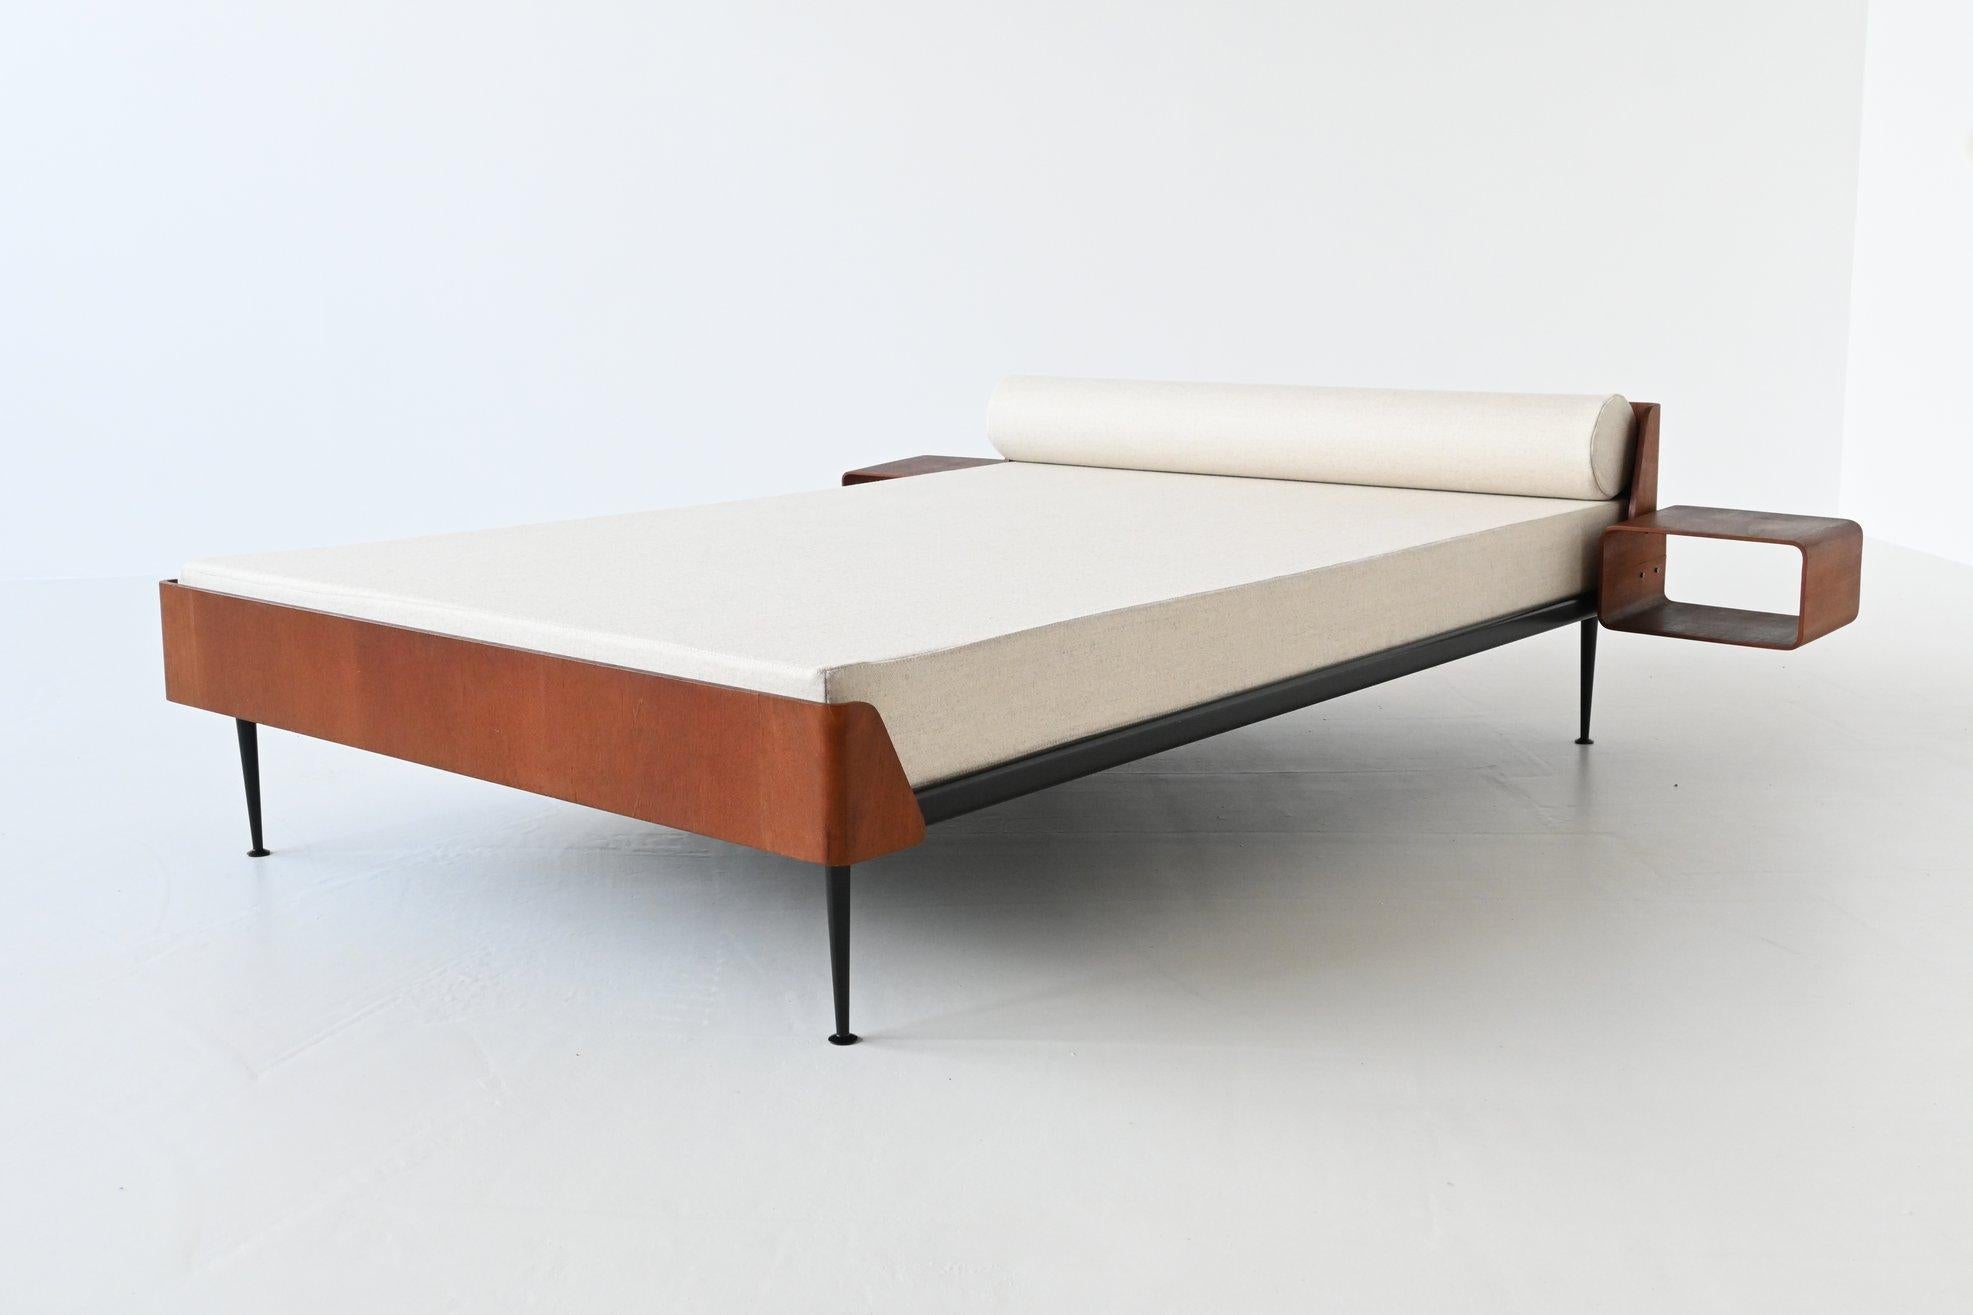 Fabric Friso Kramer Euroika Bed Auping, the Netherlands, 1963